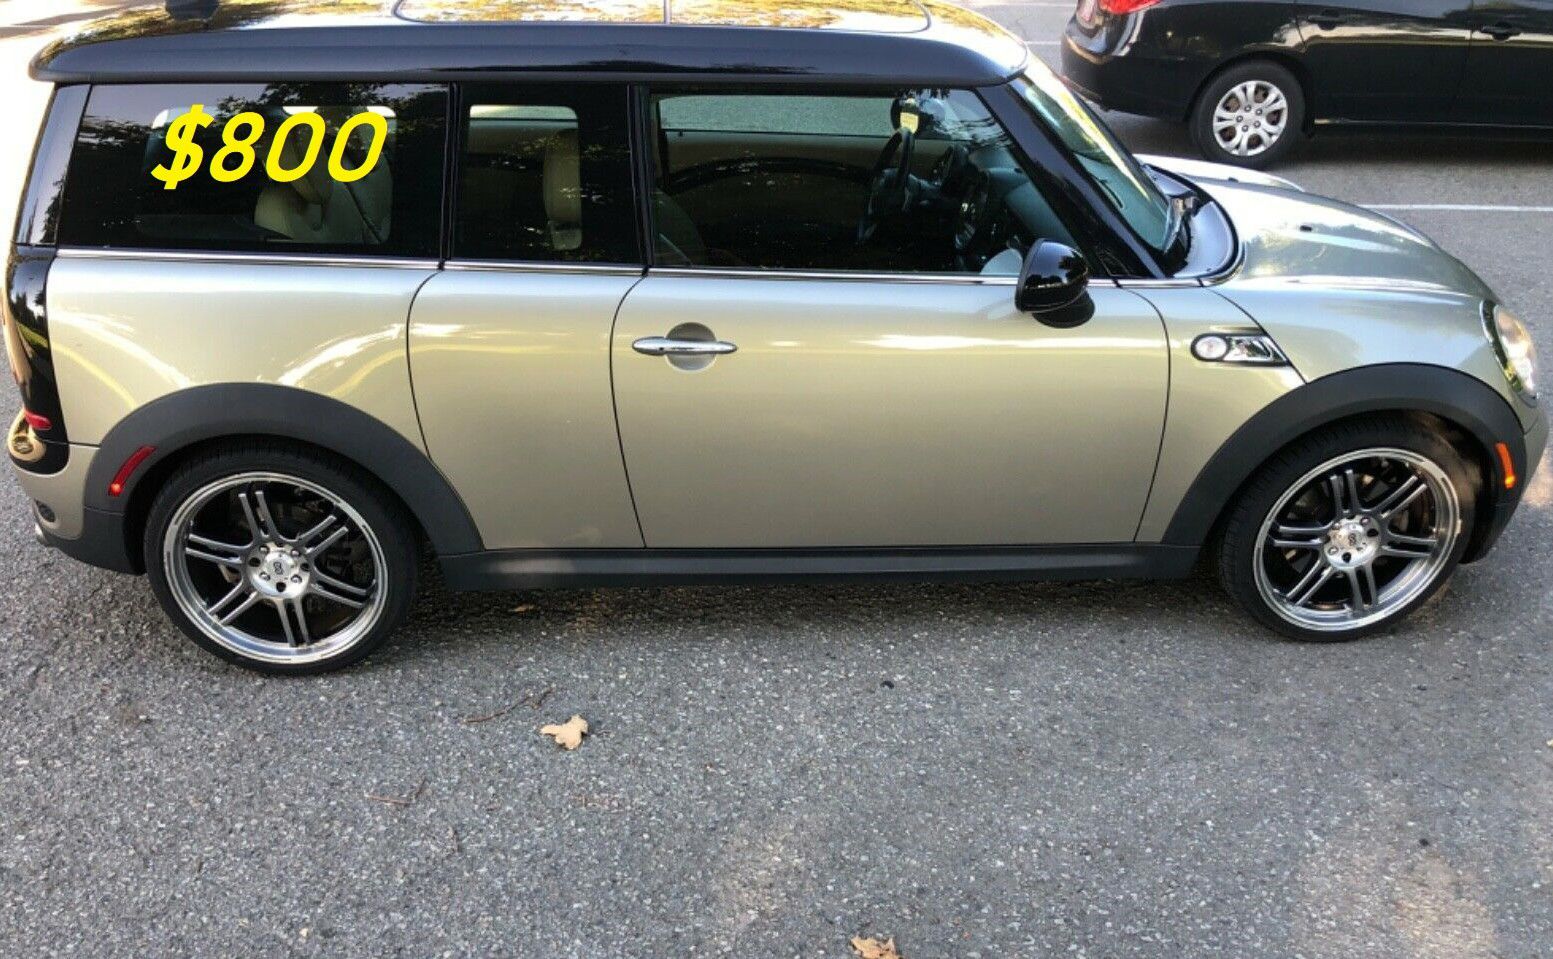 🎁💲8OO For sale URGENTLY 2OO9 Mini cooper . The car has been maintained regularly 🎁v